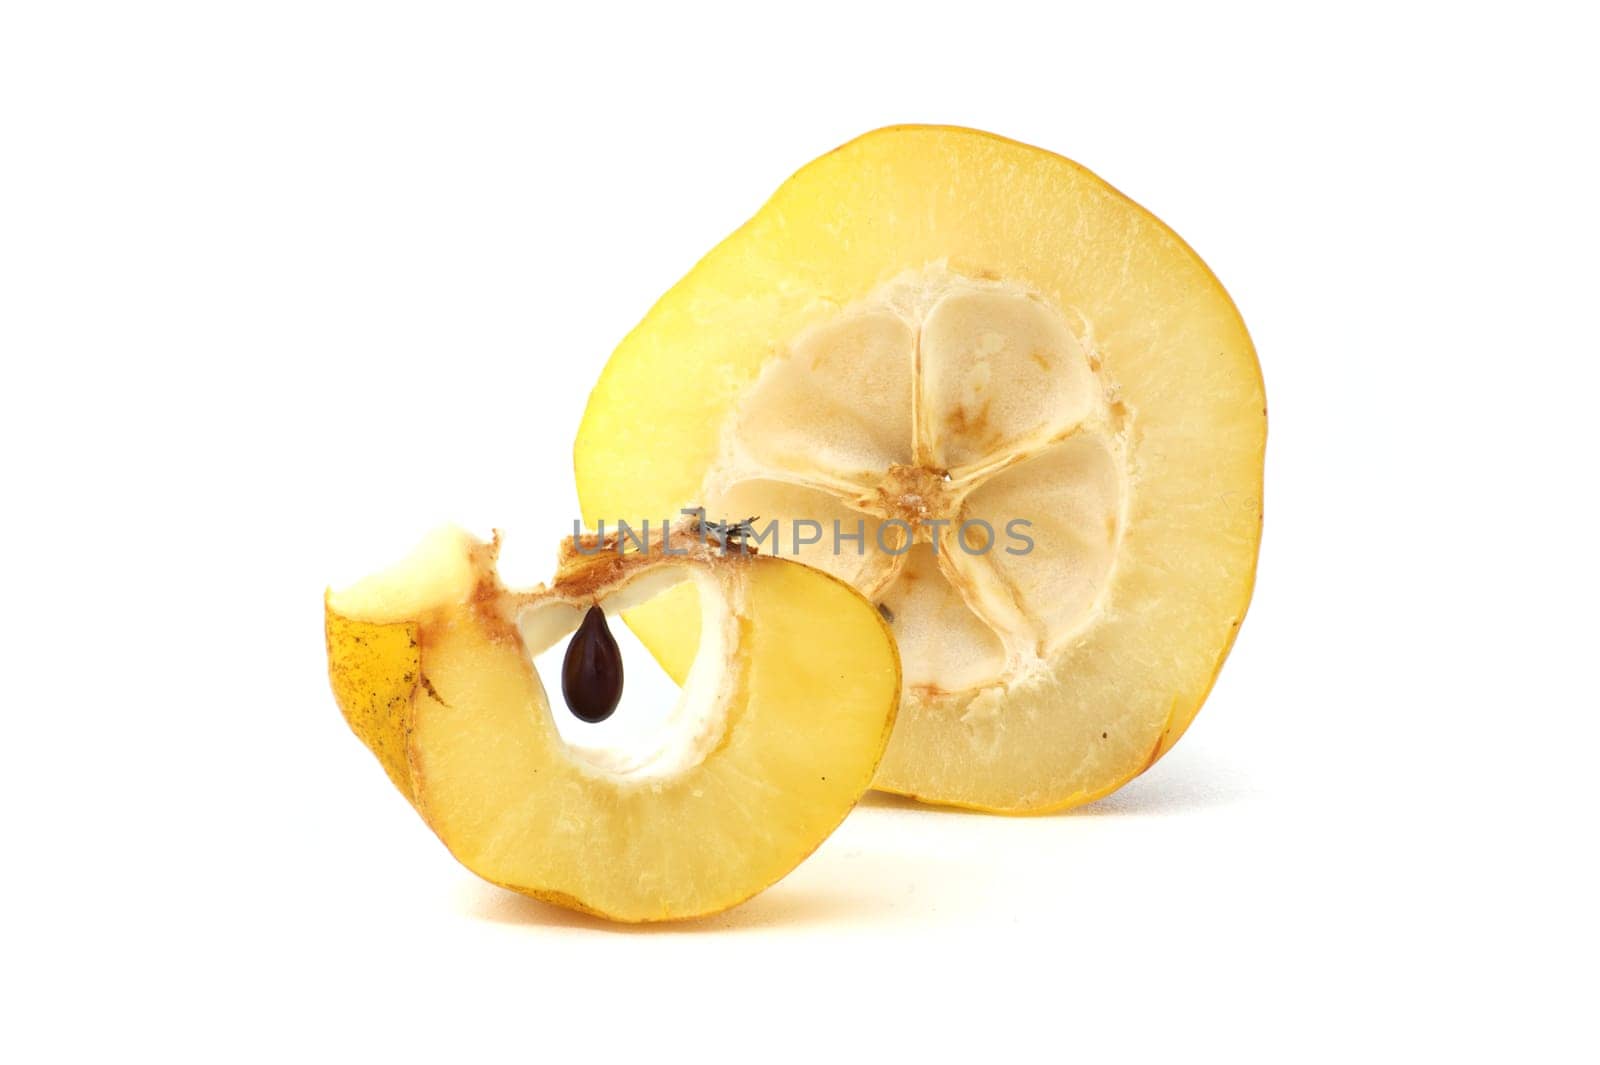 Halved quince with seeds visible over white background by NetPix